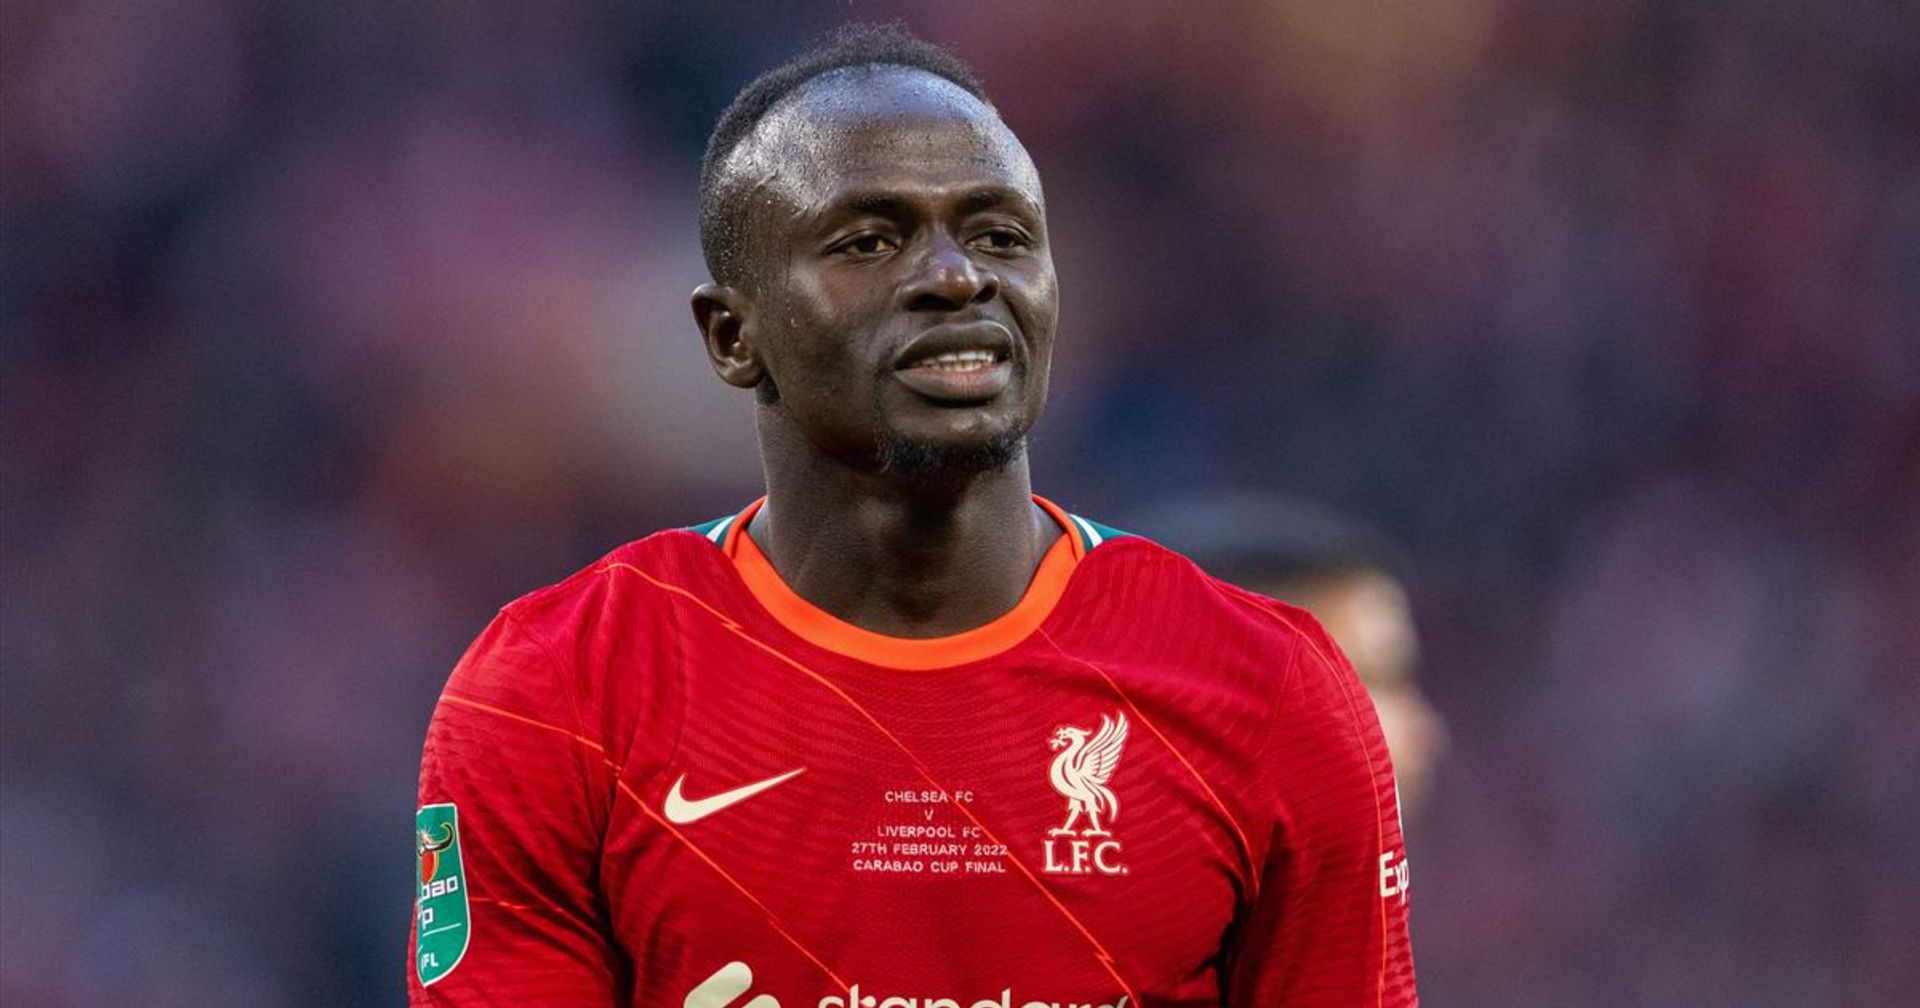 Mane not looking to leave Liverpool, contract talks scheduled